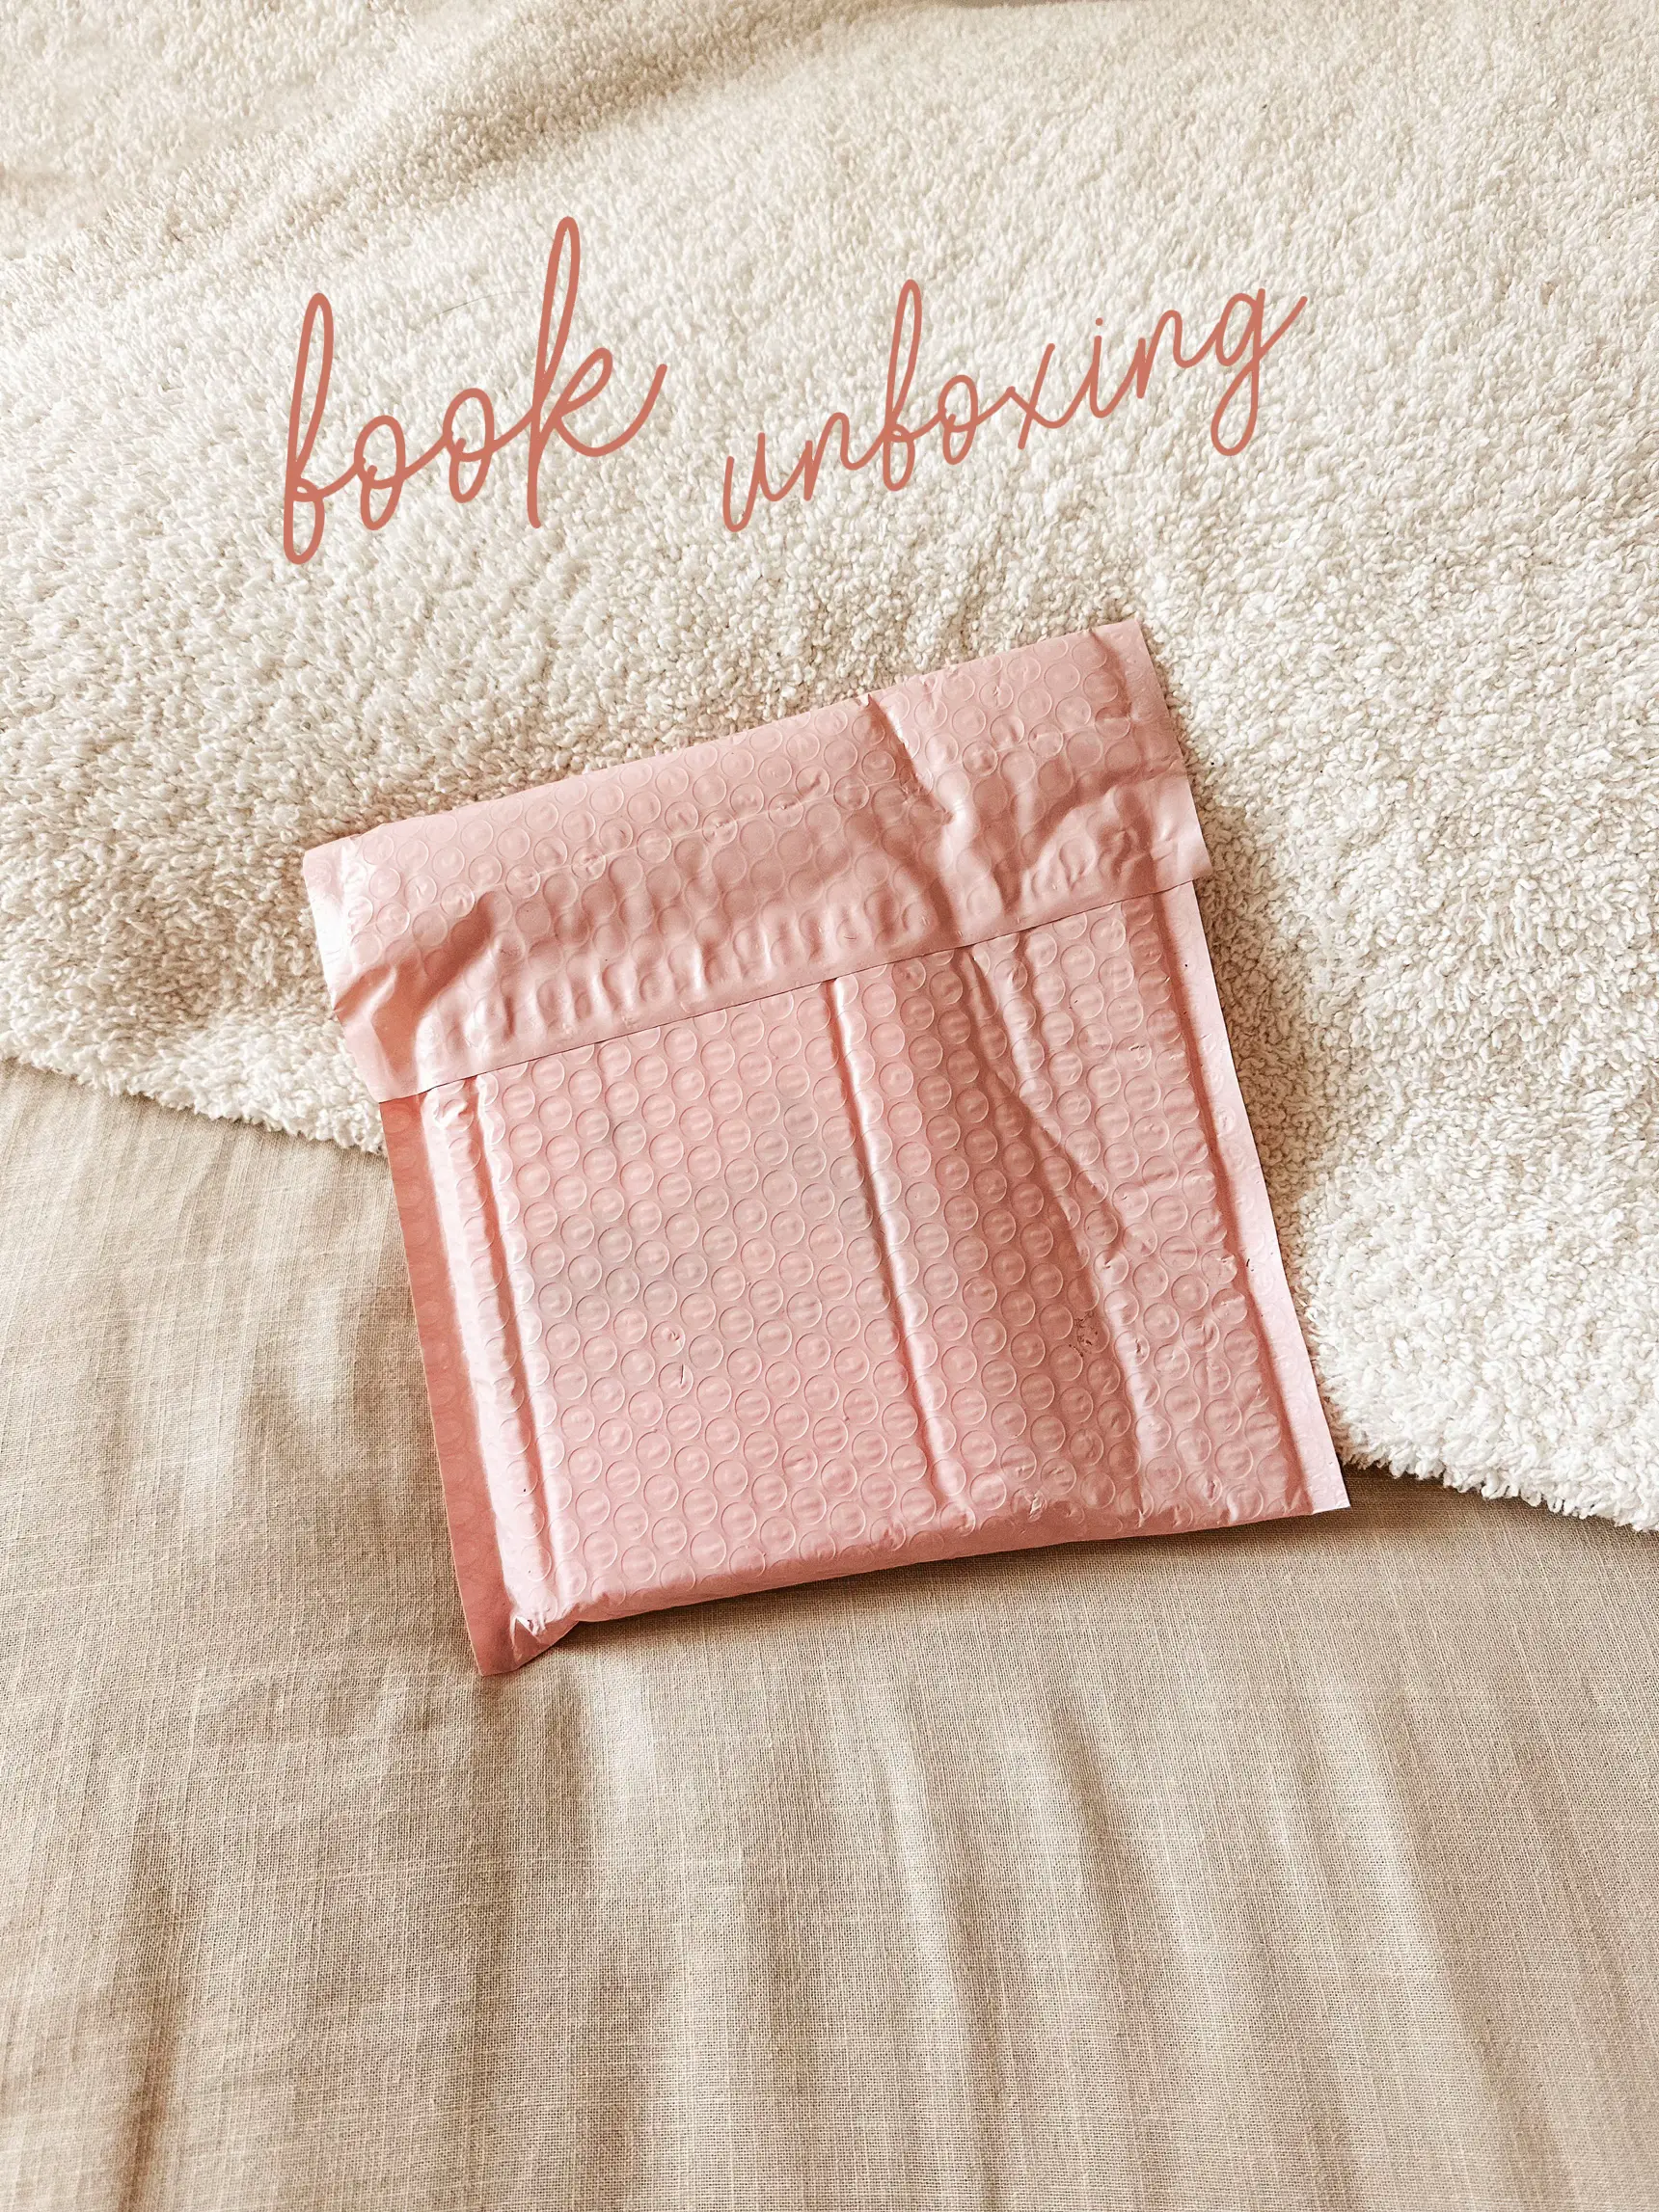 book unboxing 🤭🩷's images